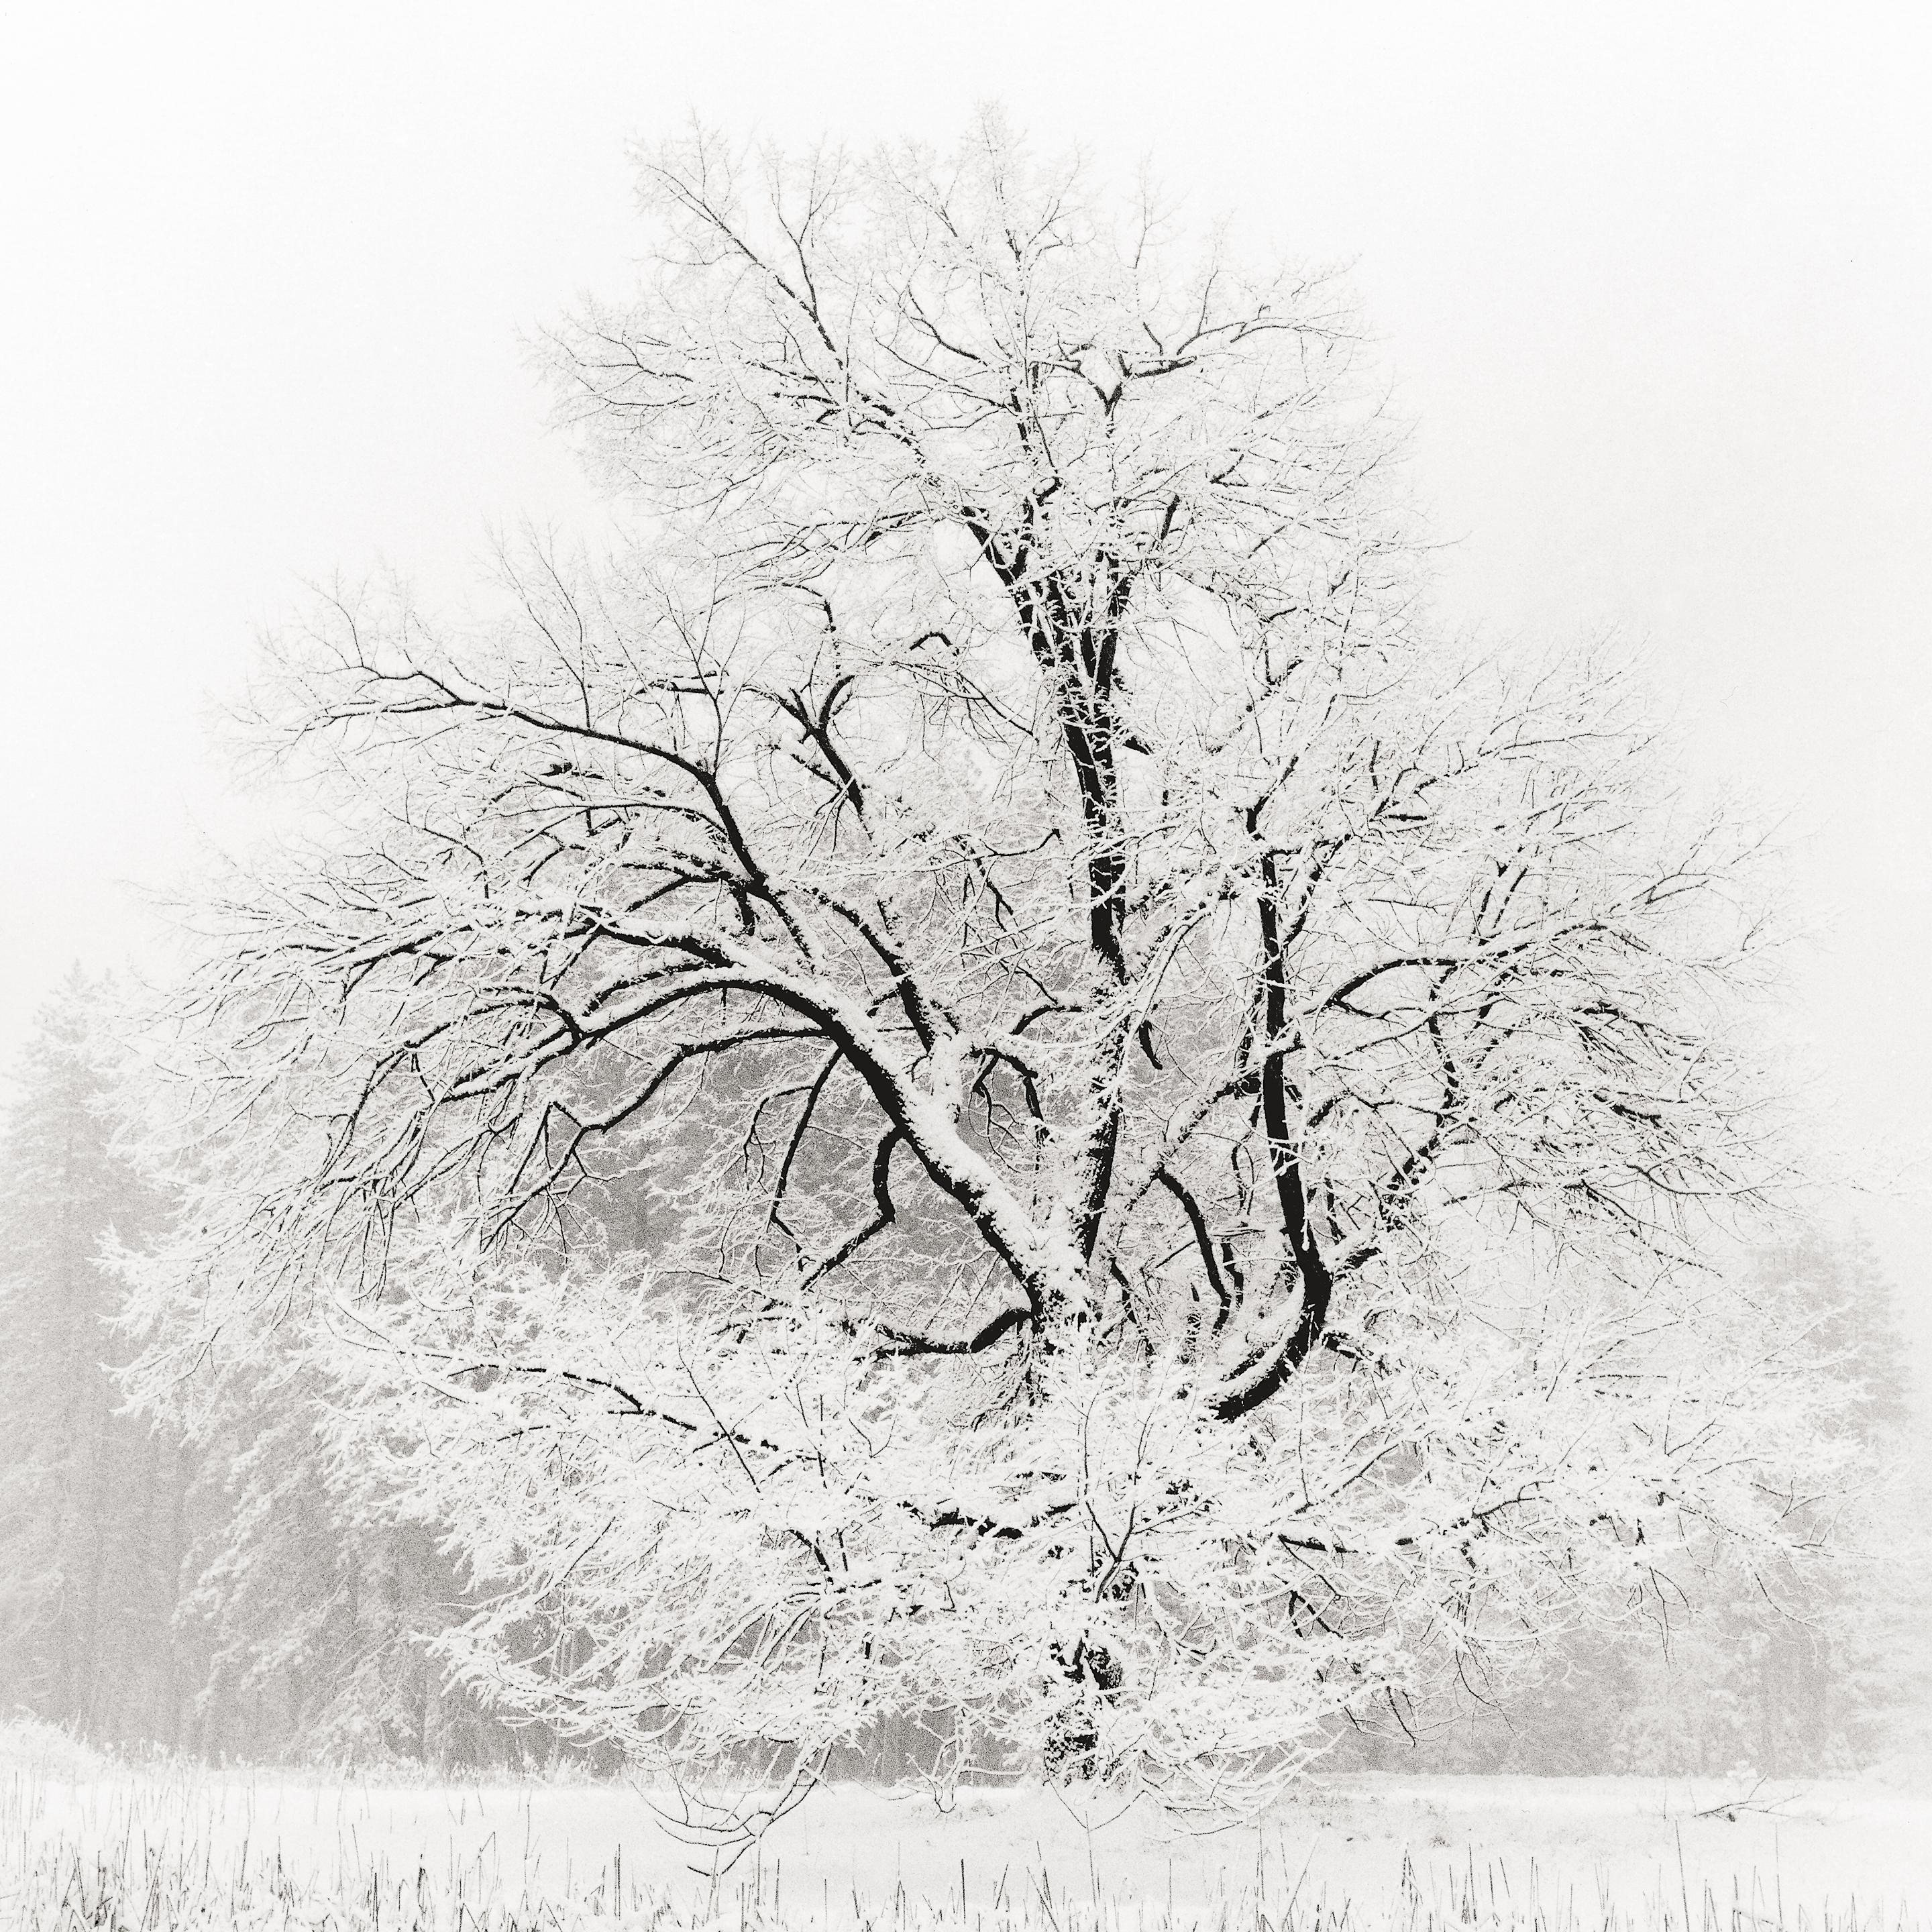 Jeffrey Conley Black and White Photograph - Grand Oak in Snow, 1991/Printed 2011